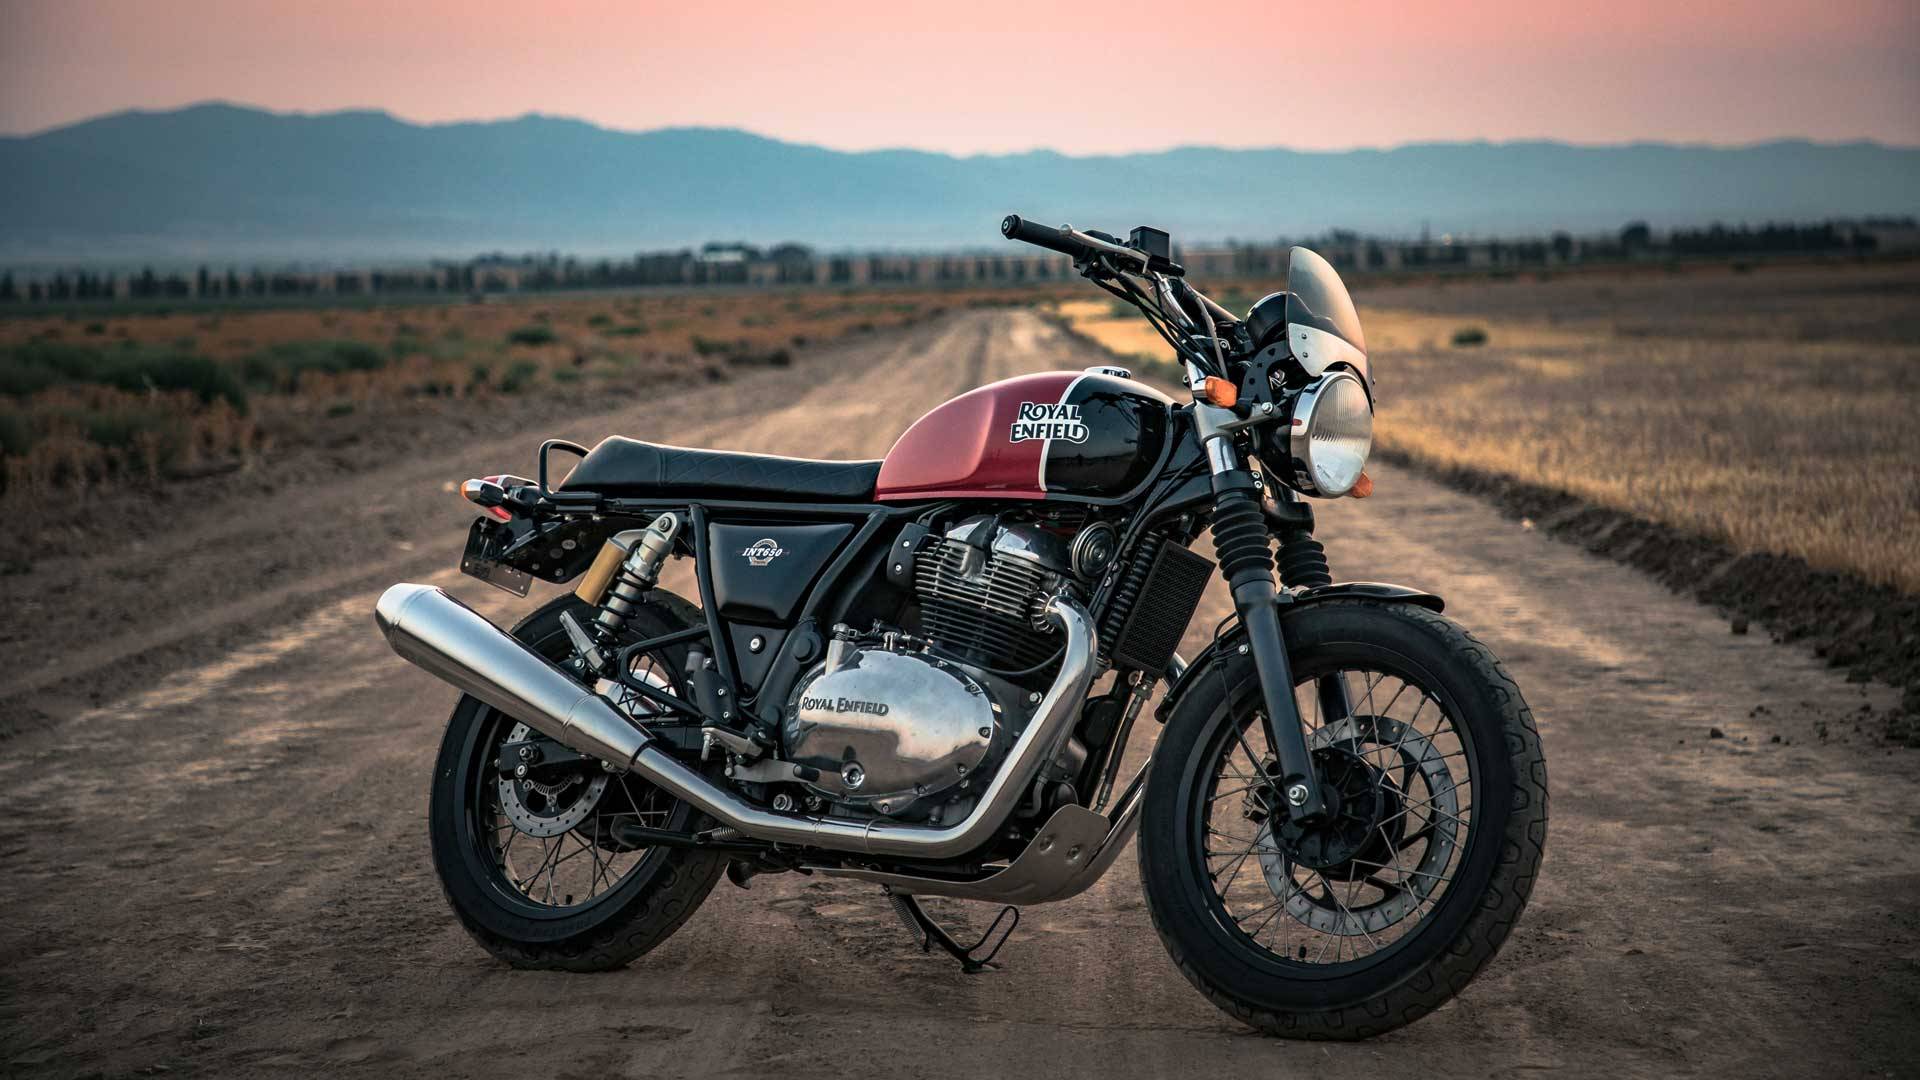 Royal Enfield Twins Confirmed for 2019 Starting at $799